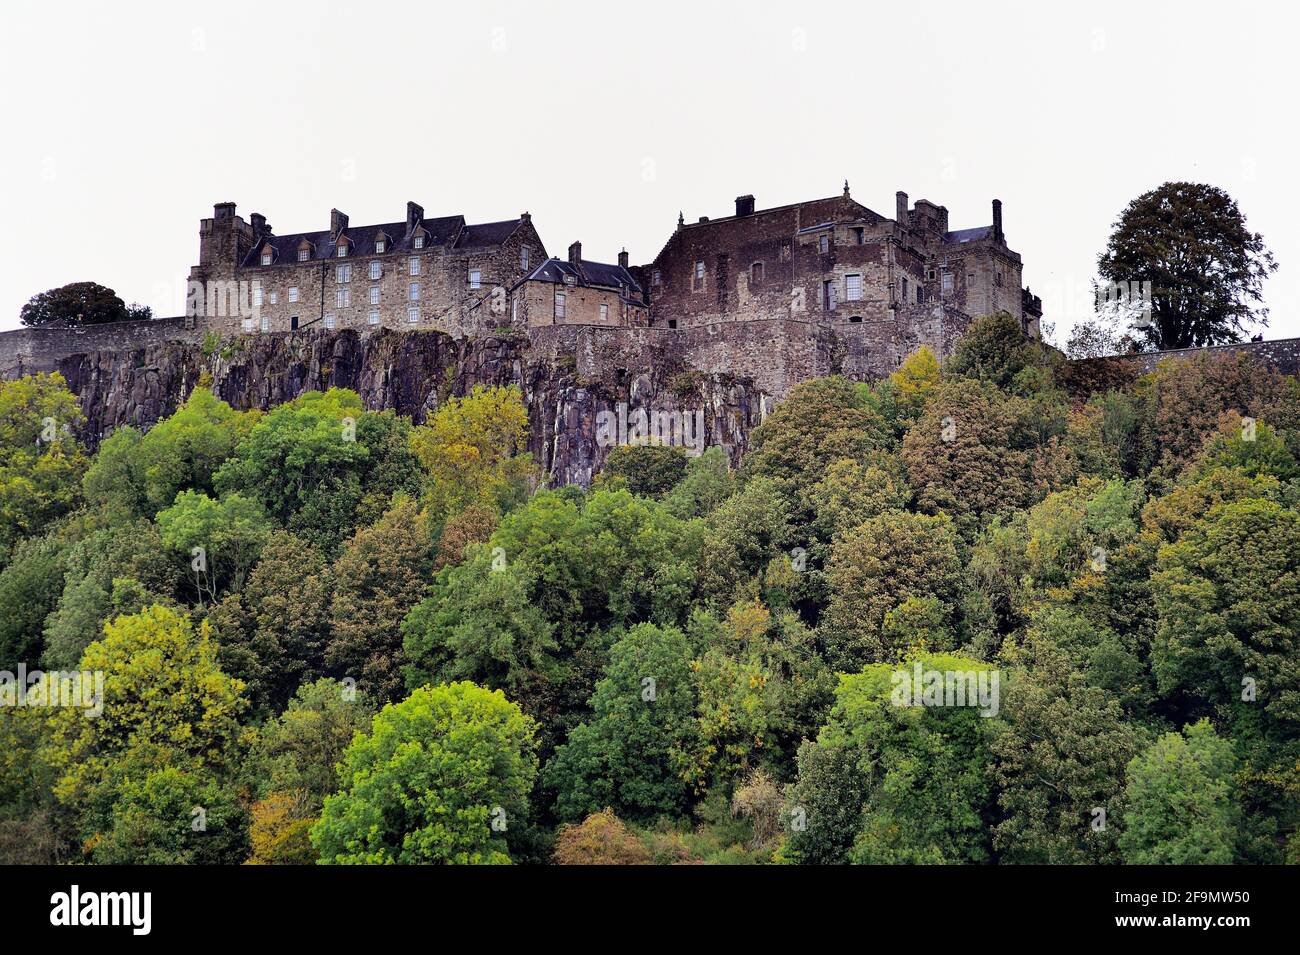 Stirling, Scotland, United Kingdom. Stirling Castle, one of Scotland's most historically important castles. Stock Photo